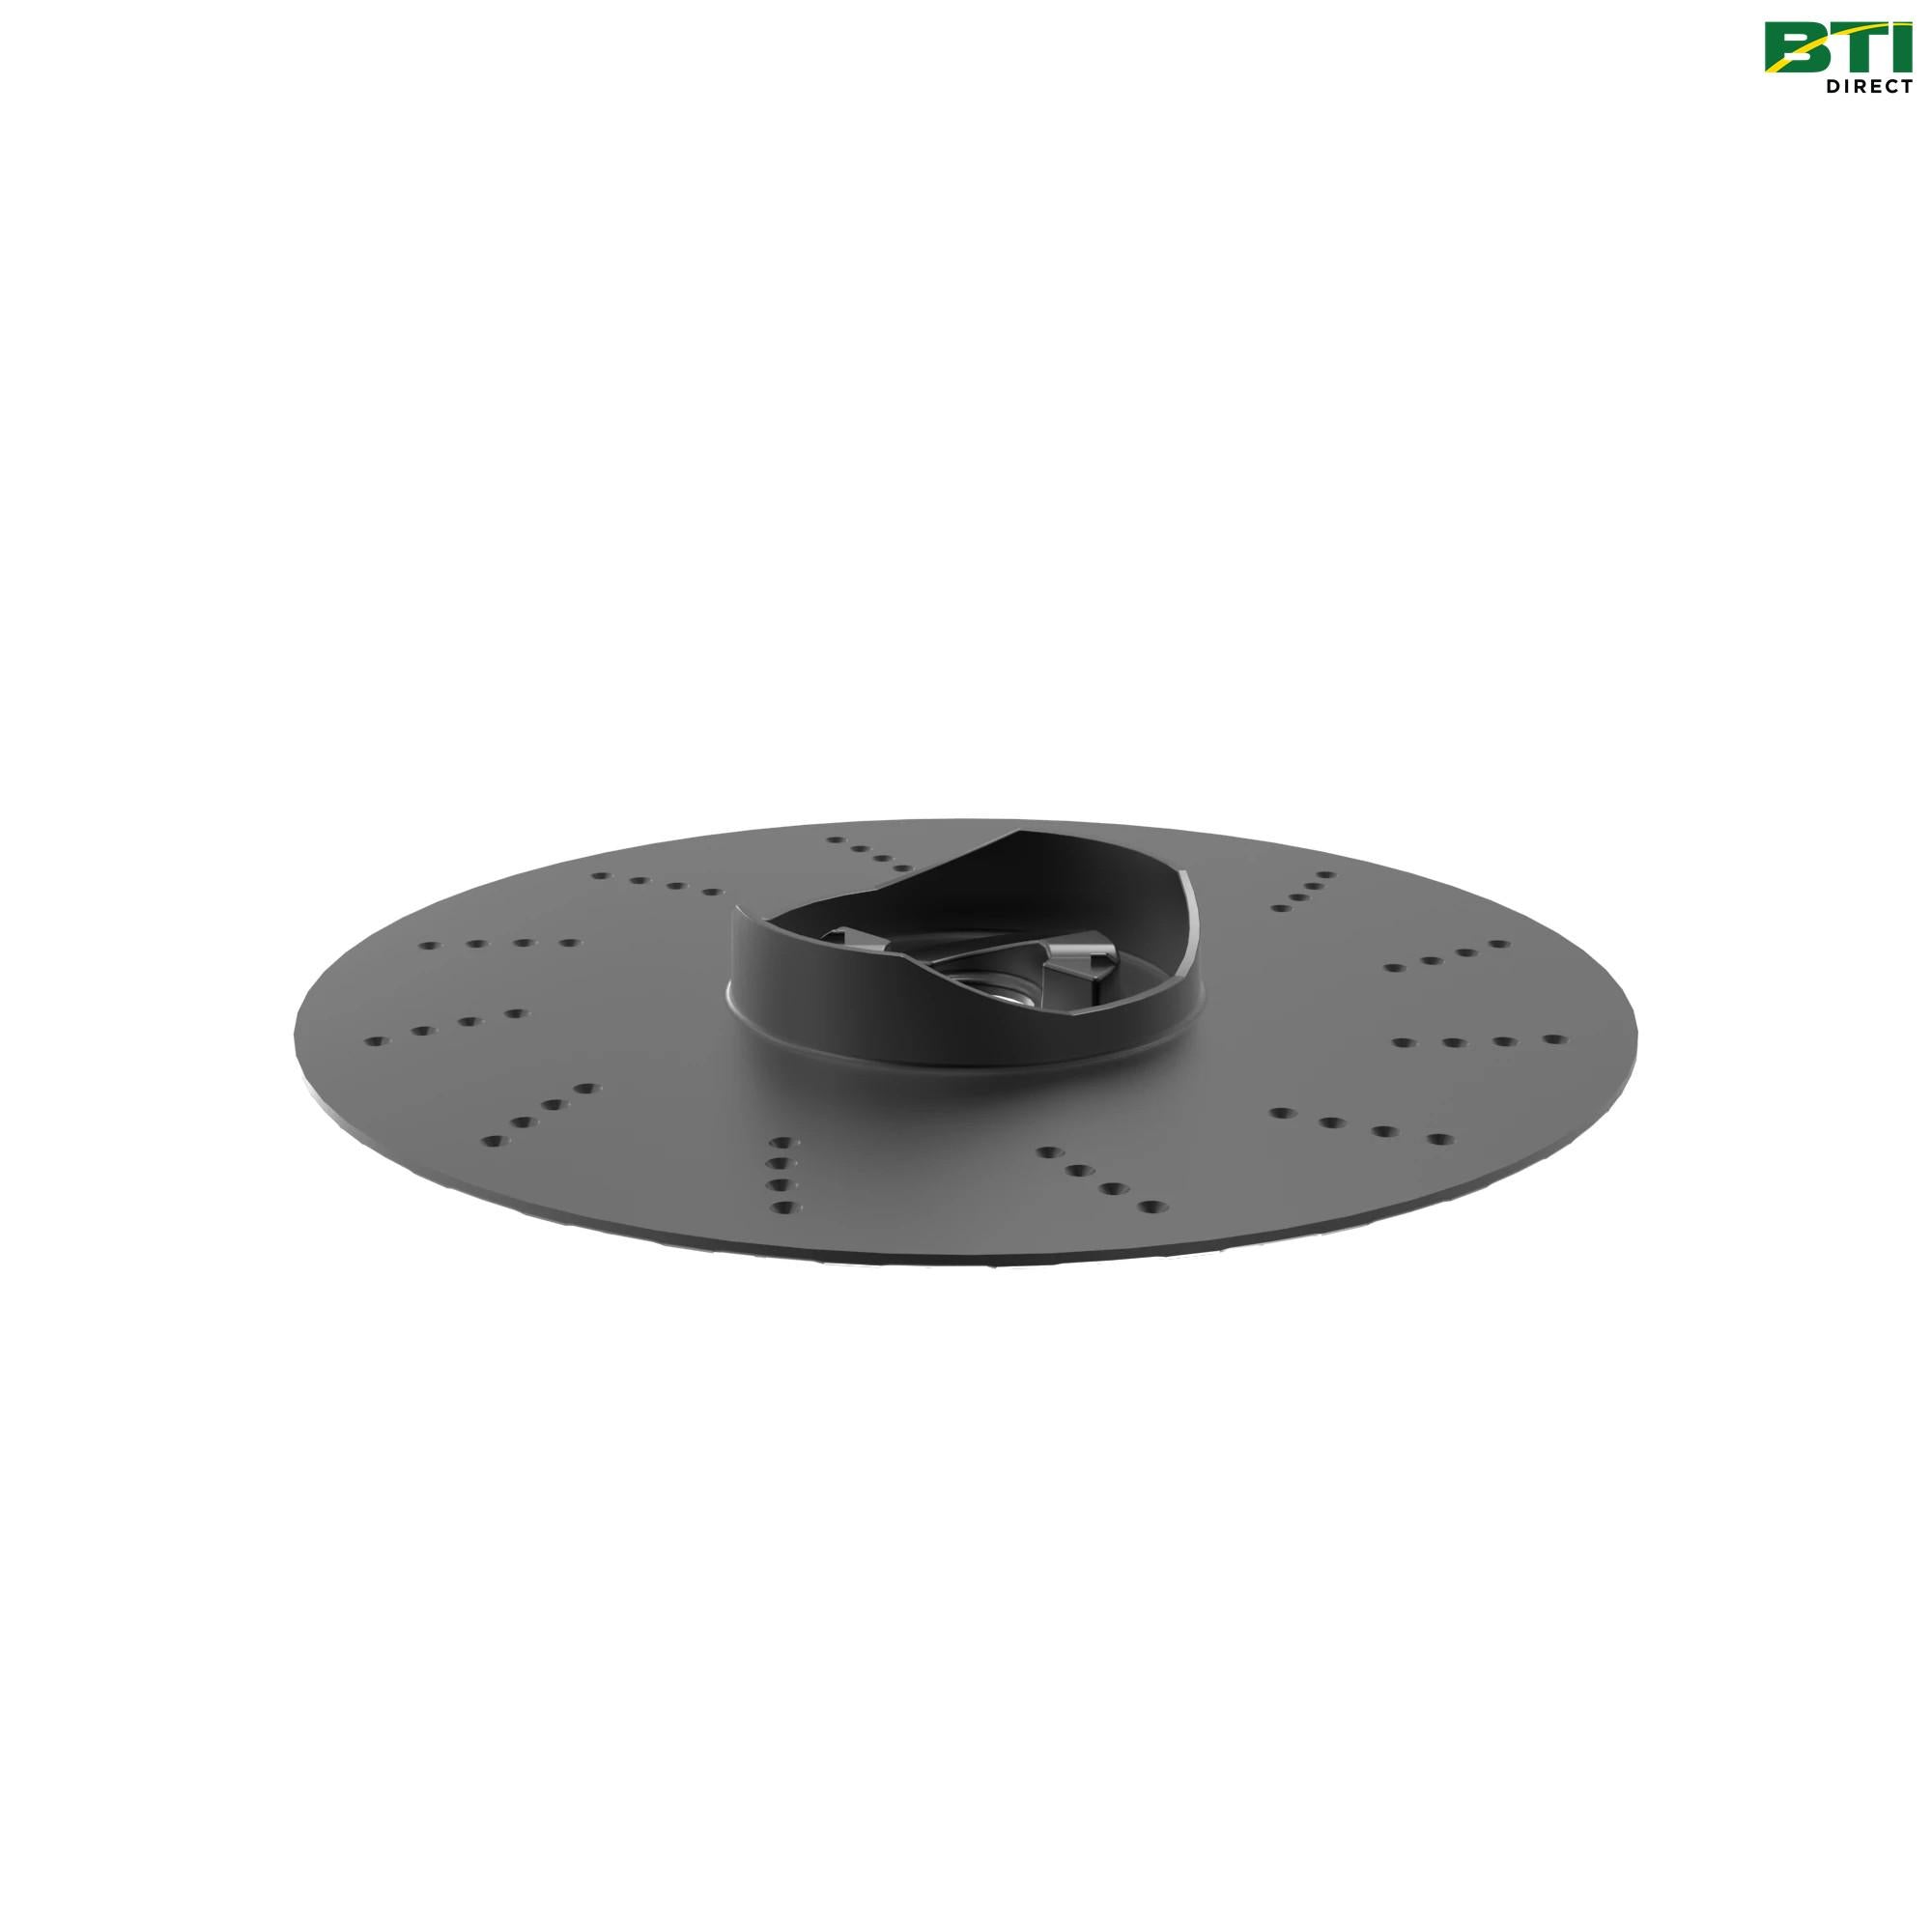 A65622: Cotton Disk Seed Plate (Pack of 2)